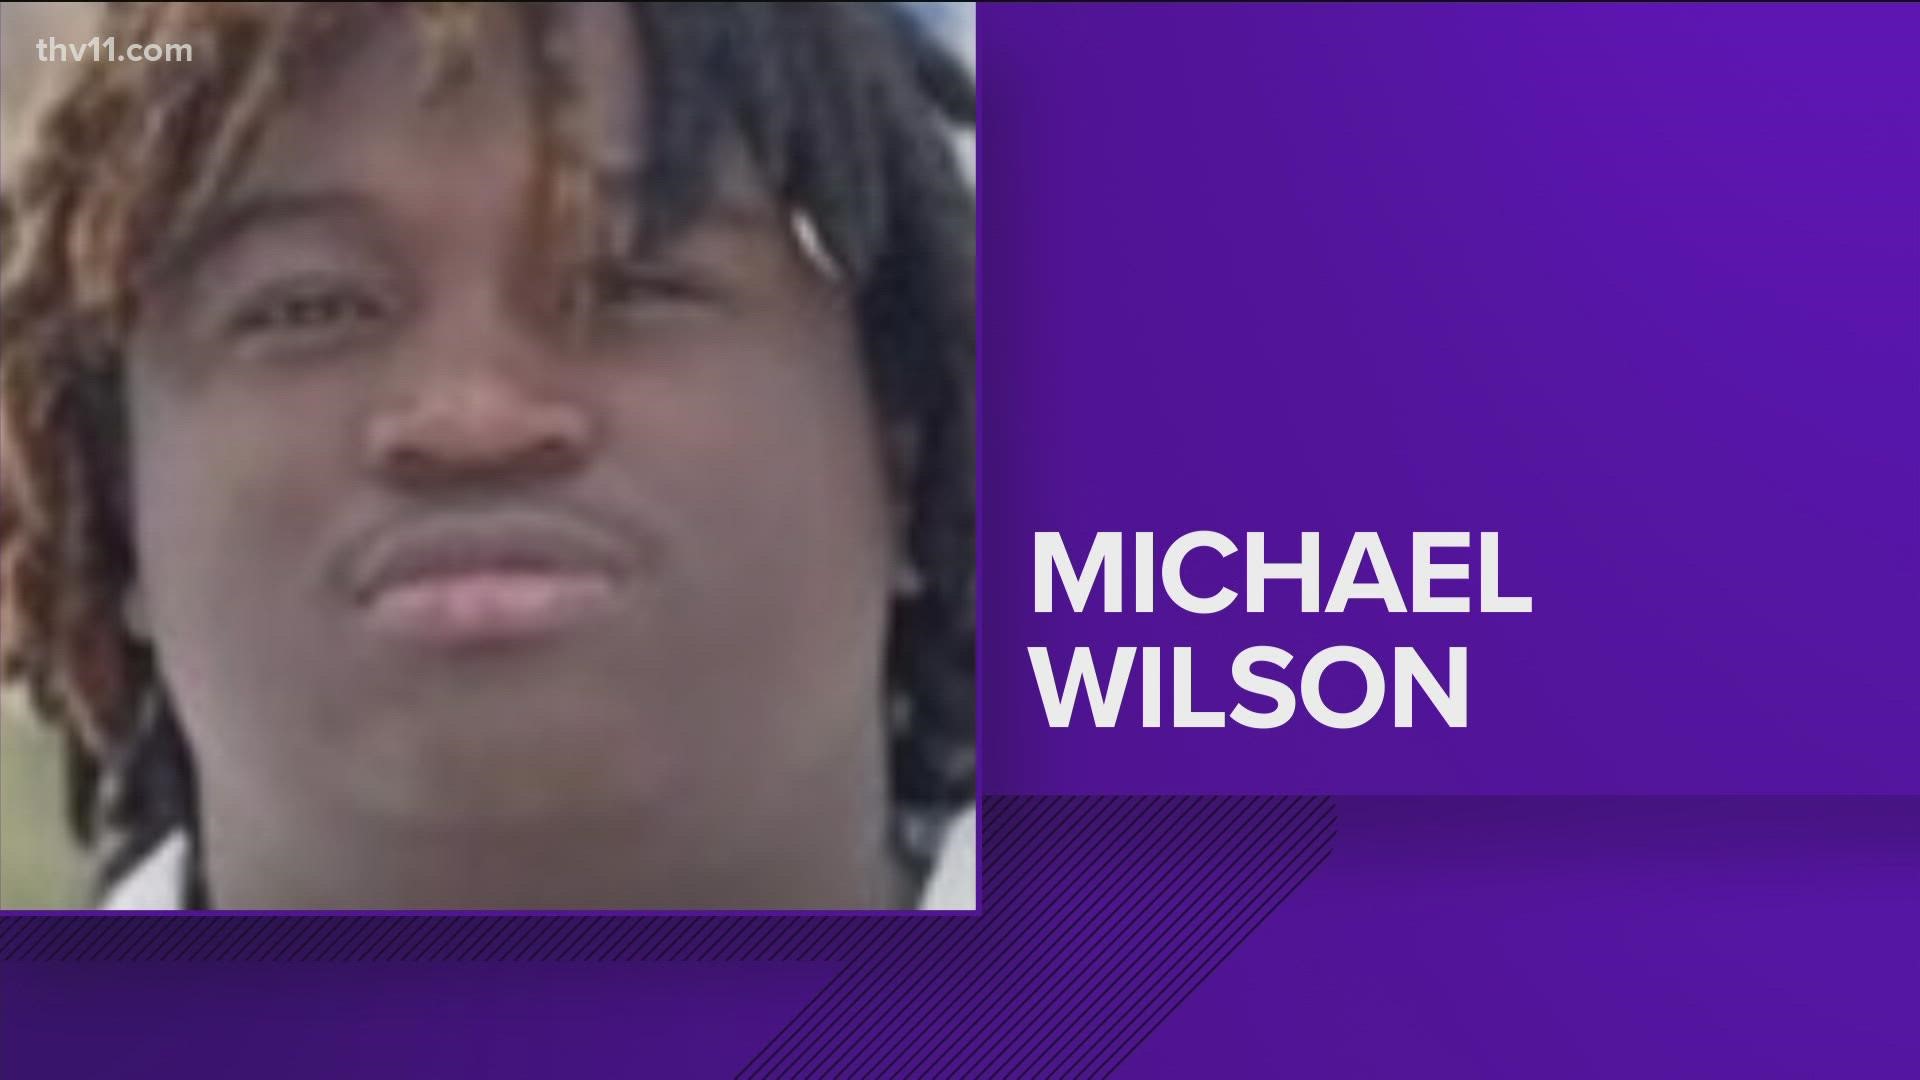 Little Rock police have started searching for 19-year-old Michael Wilson who is a suspect in the shooting death of 18-year-old Isaiah Hall.